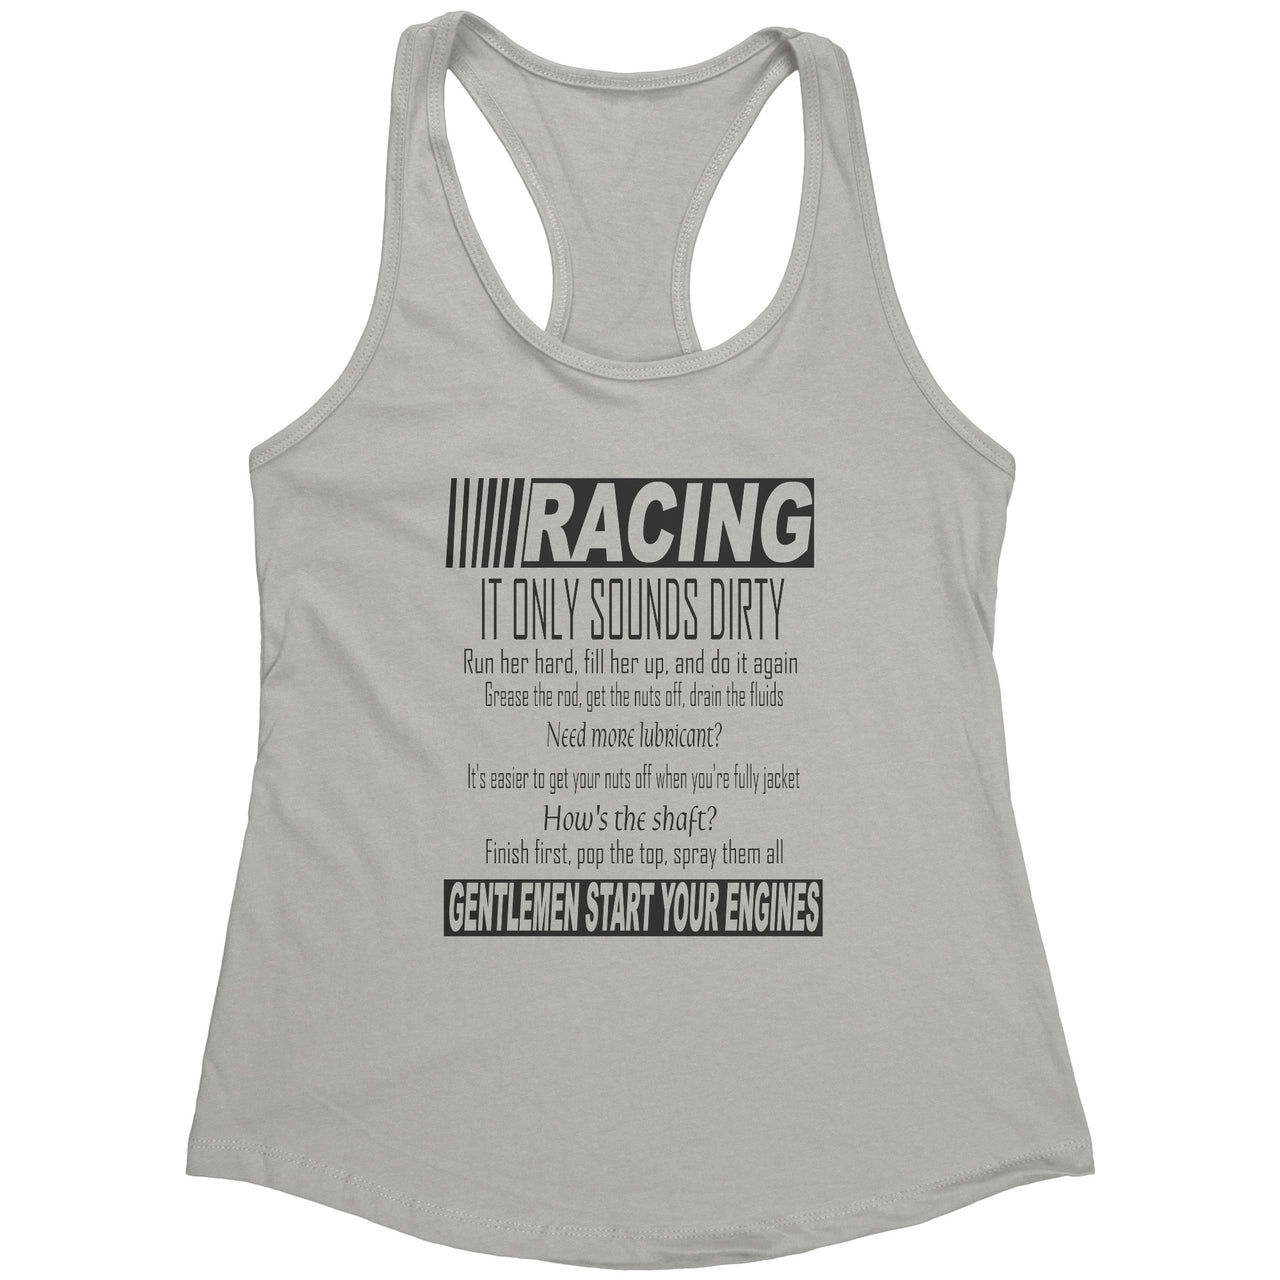 Racing It only sounds dirty Women's Tank Tops BV